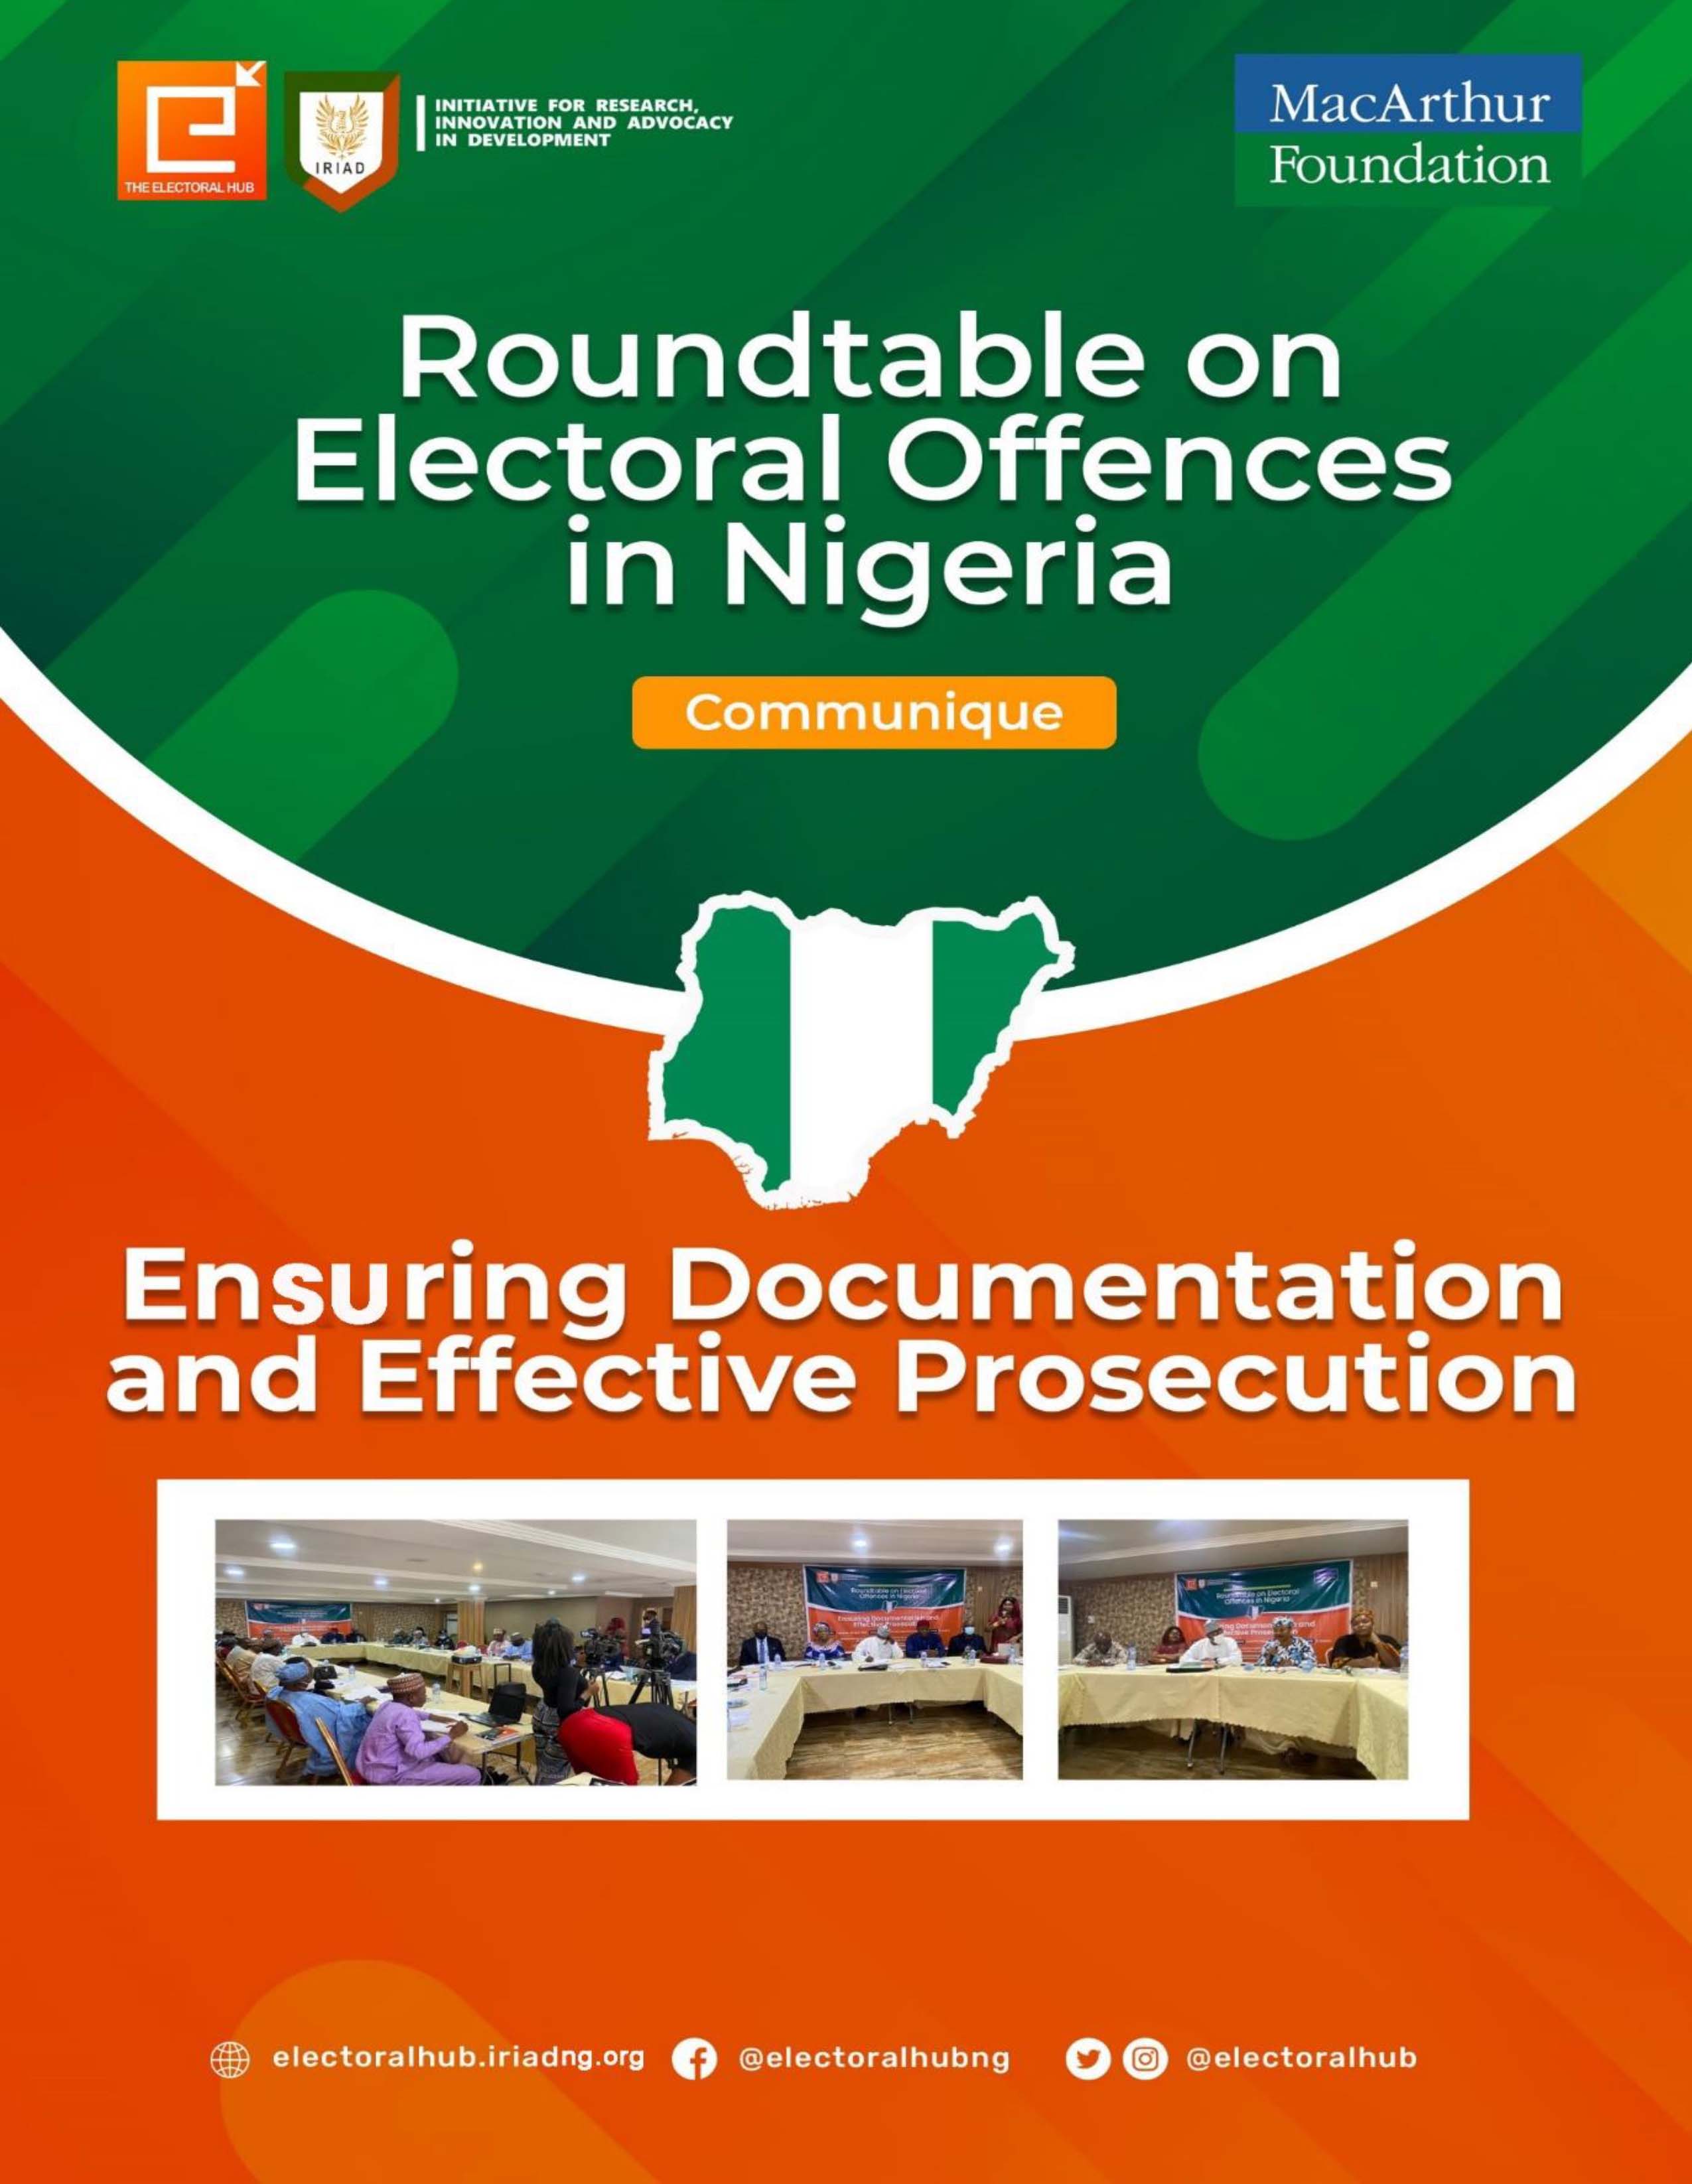 Communique on Roundtable on Electoral Offences in Nigeria